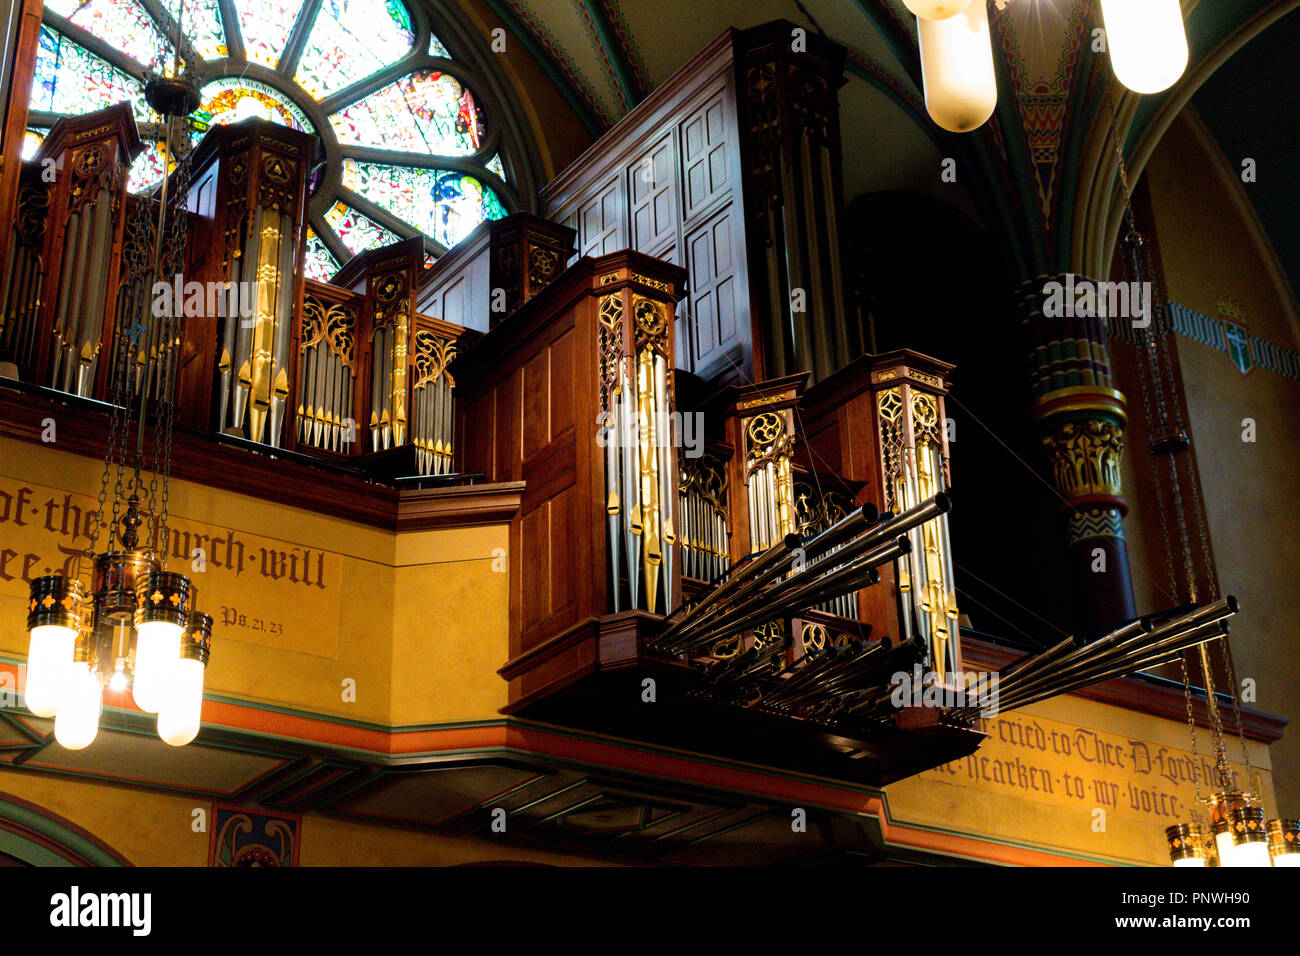 Organ in the Cathedral of the Madeleine. Salt Lake City, Utah, US. Stock Photo